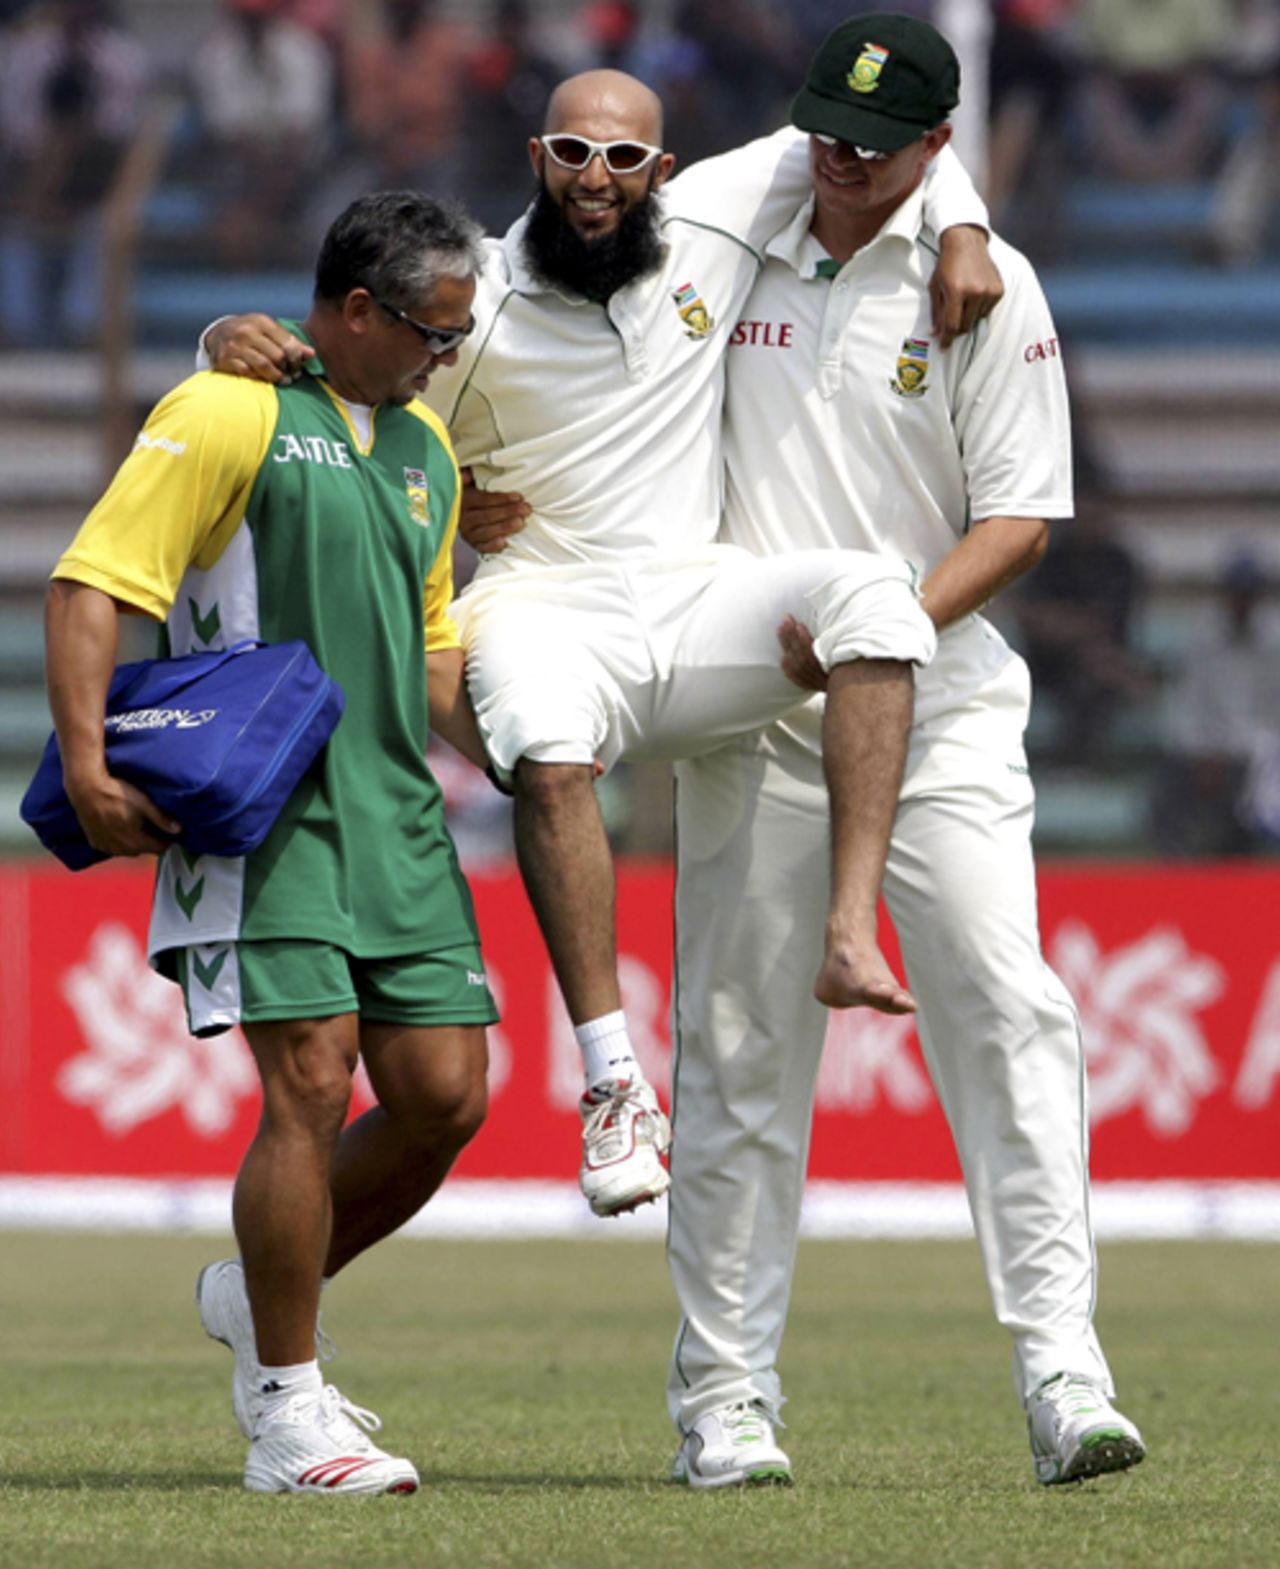 Hashim Amla is carried off the field by physio Shane Jabbar and Andre Nel after he injured his foot, Bangladesh v South Africa, 2nd Test, Chittagong, 3rd day, March 2, 2008 

